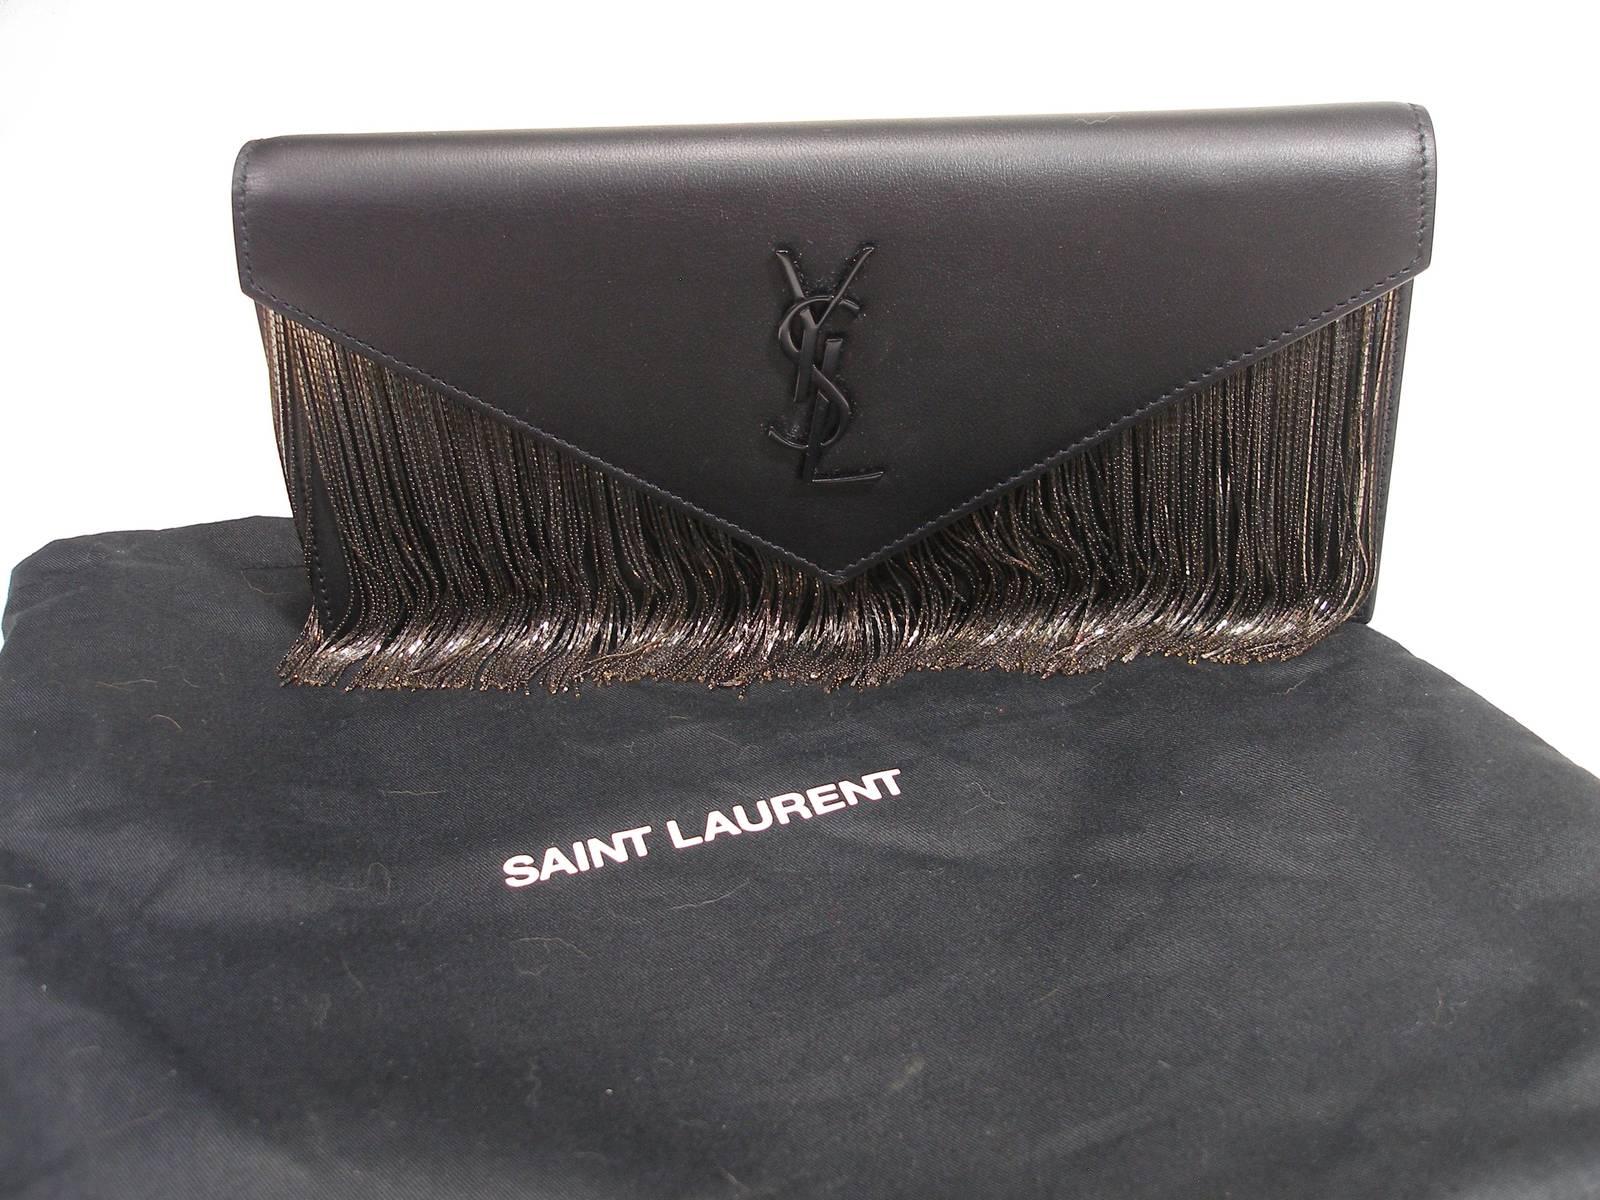 Yves Saint Laurent Le Sept Fringed Pouch in black leather / SOLD OUT in shop YSL For Sale 4